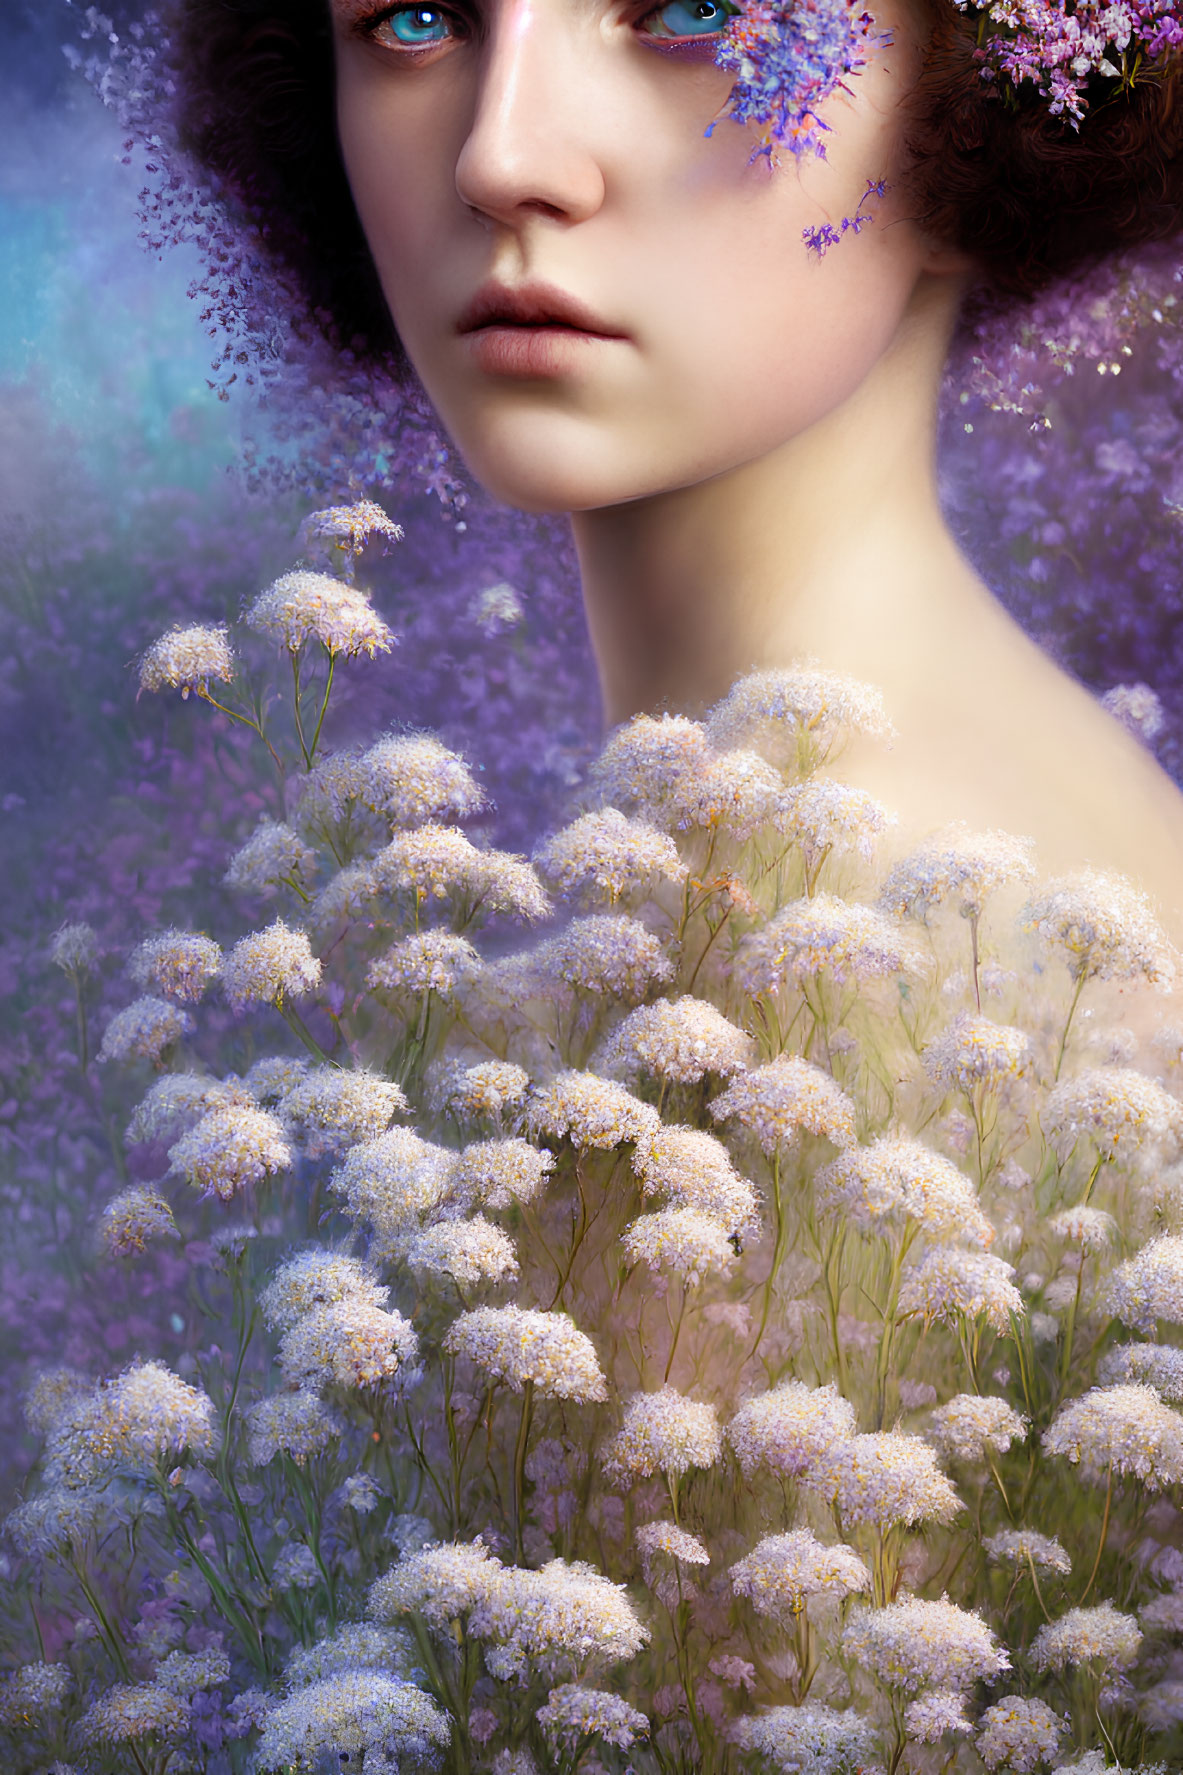 Digital art portrait featuring person with purple flowers in hair and background